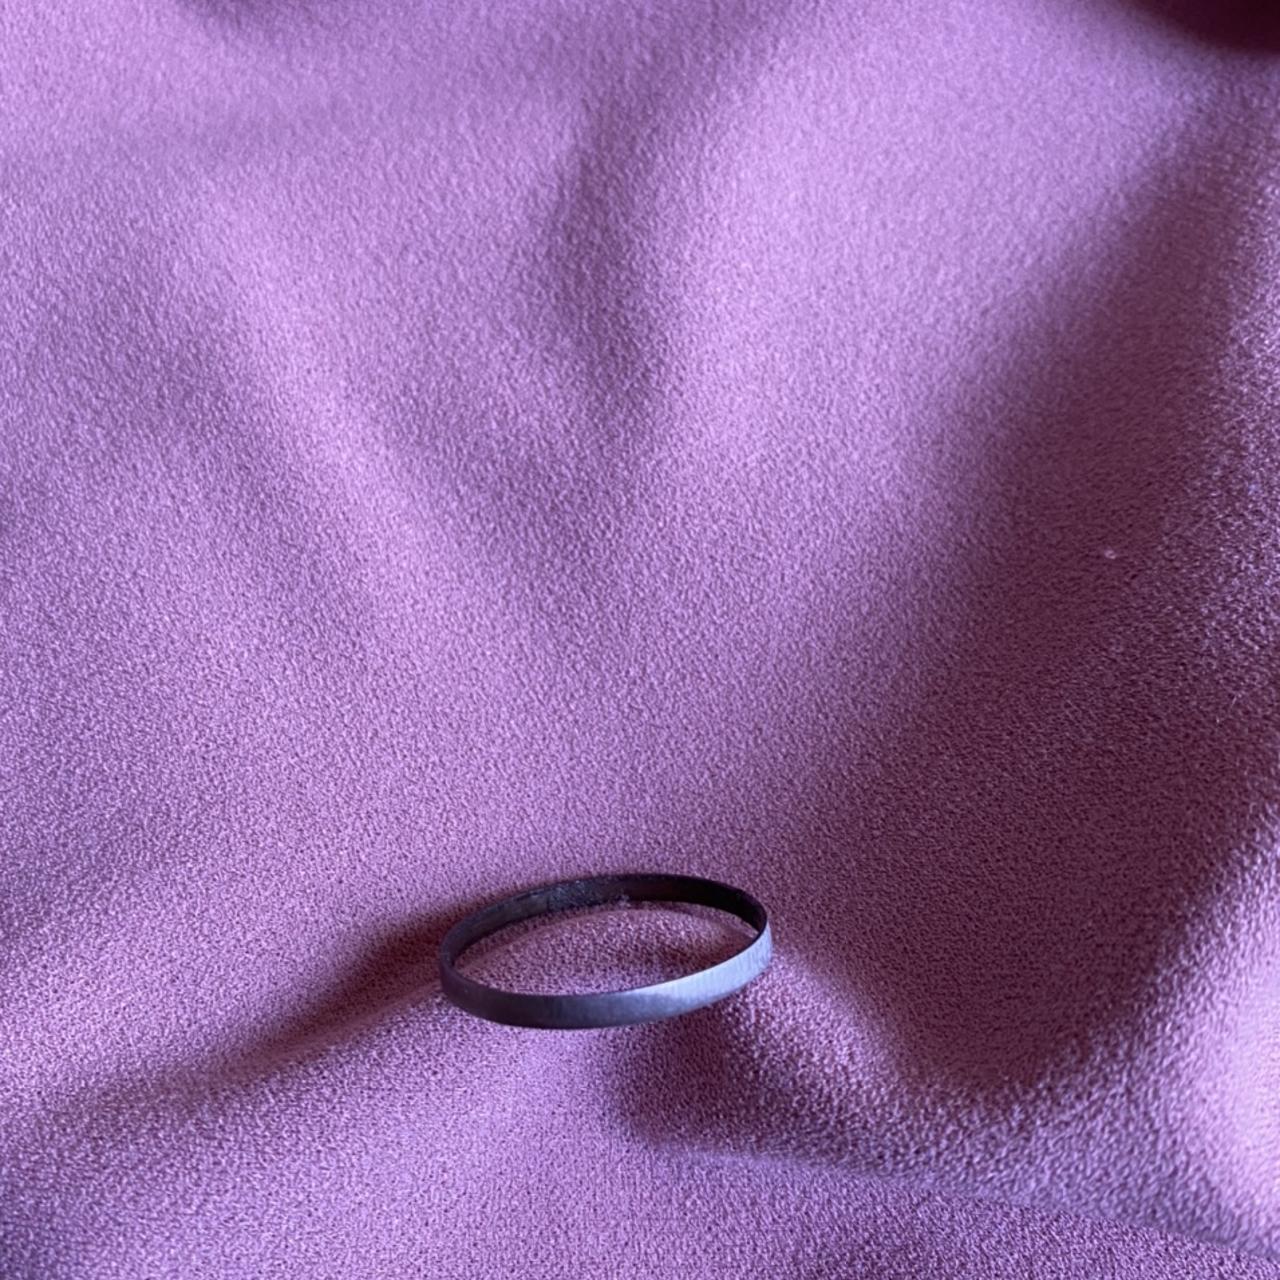 Product Image 2 - Silver / reflective band ring